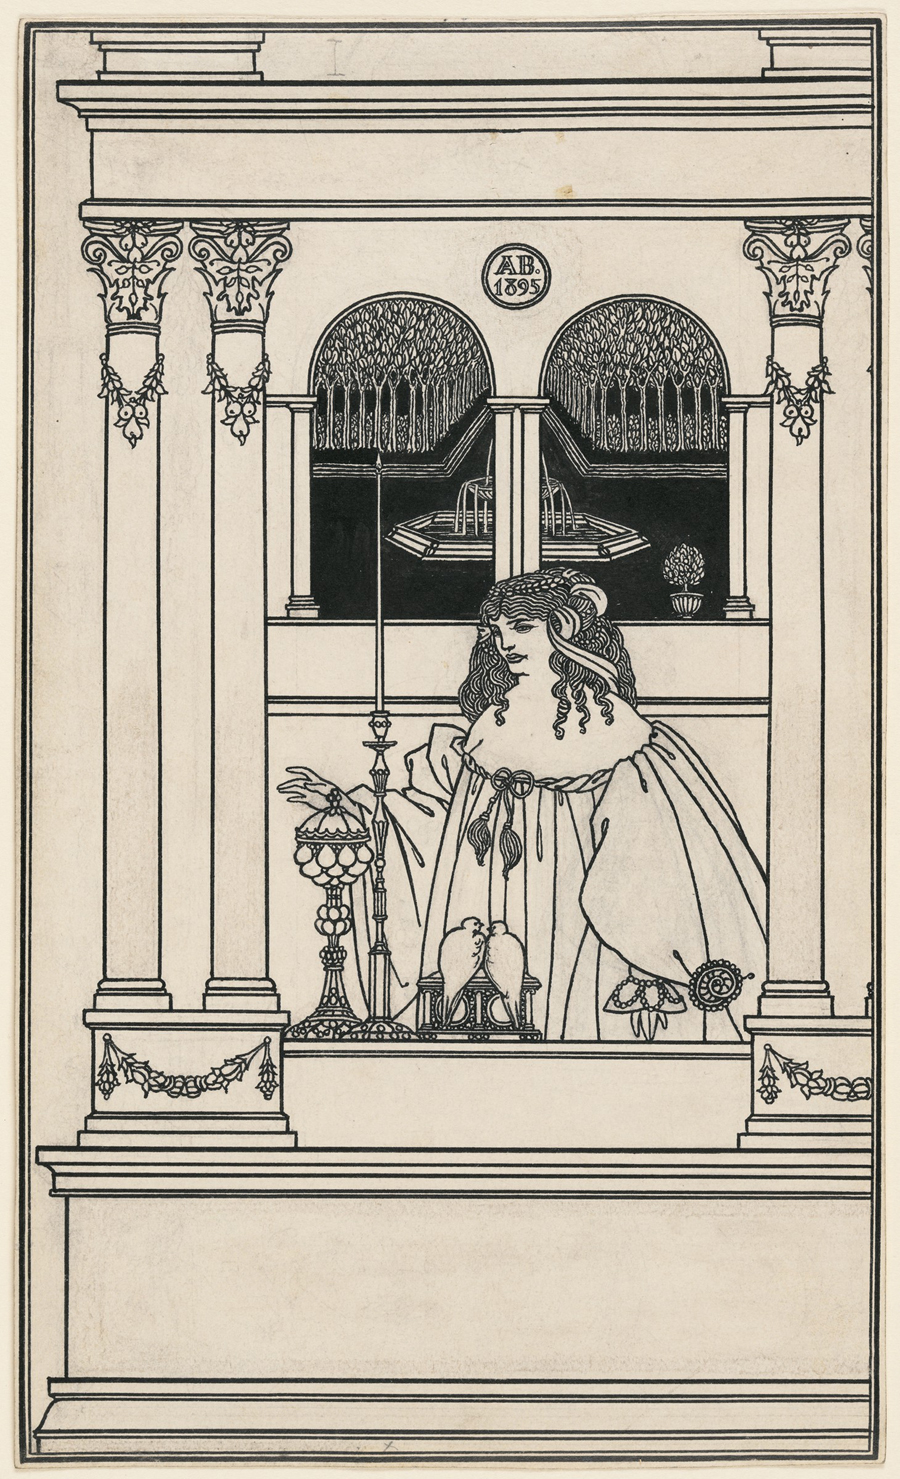 Frontispiece design for “The Story of Venus and Tannhauser”